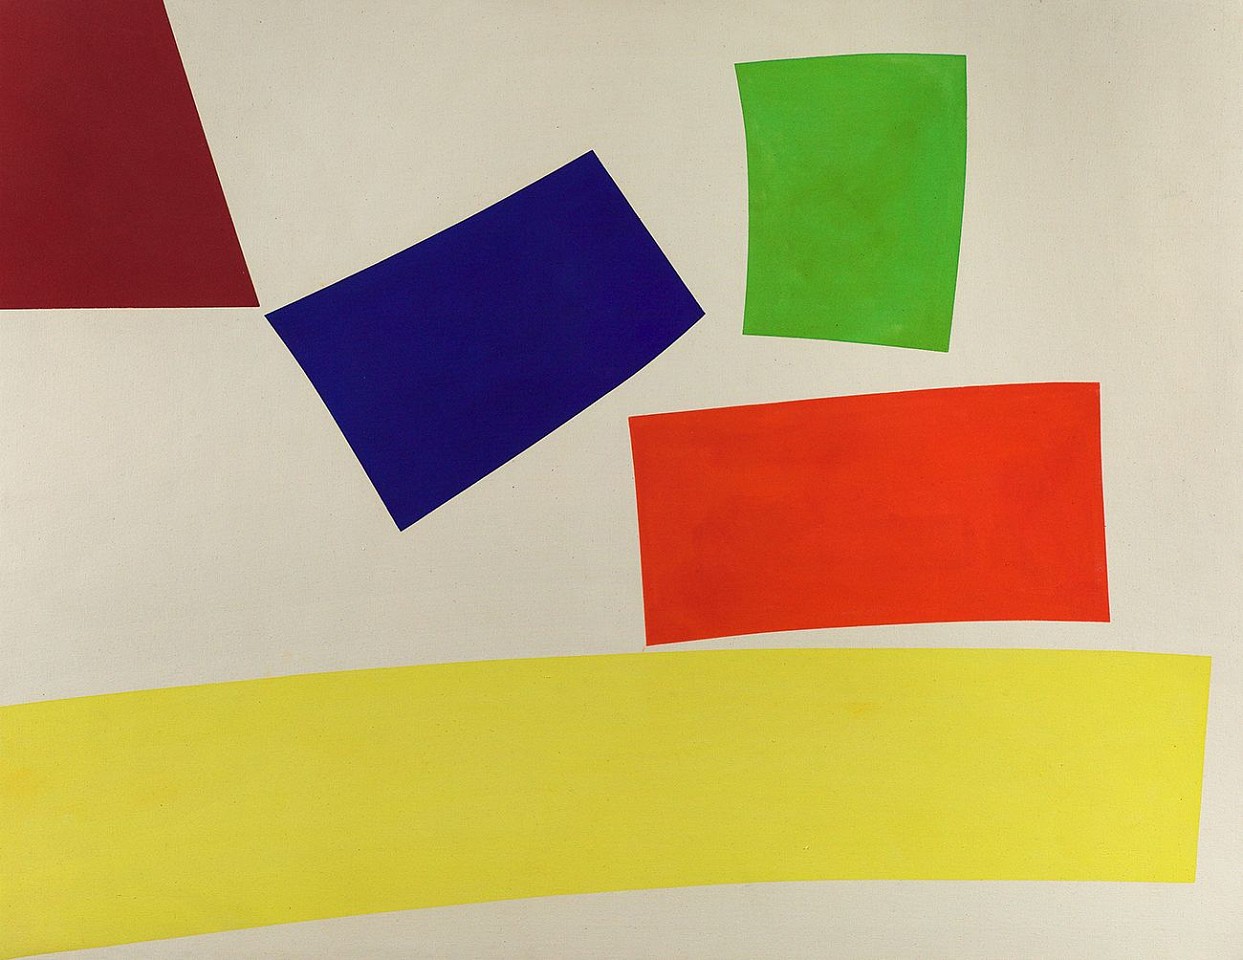 William Perehudoff, AC-68-6 | SOLD, 1968
Acrylic on canvas, 54 1/4 x 70 in.
SOLD
PER-00048